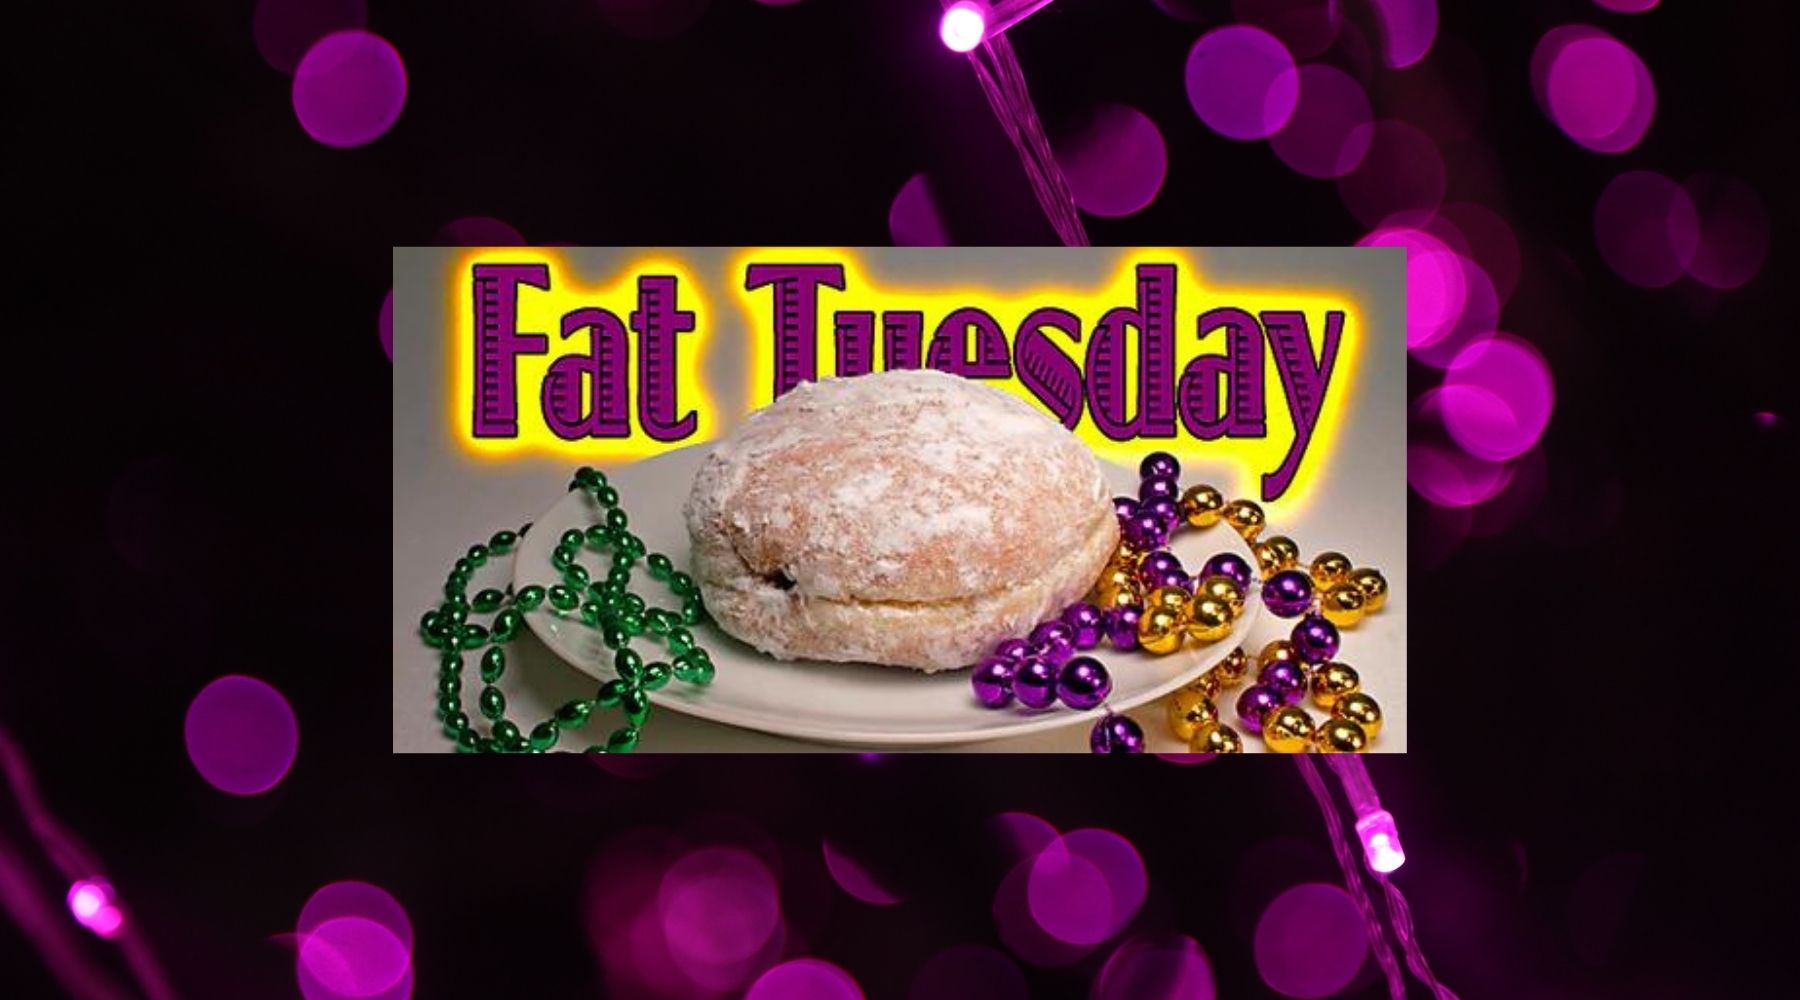 IT'S THAT TIME OF YEAR AGAIN - FAT TUESDAY OR PACZKI DAY!